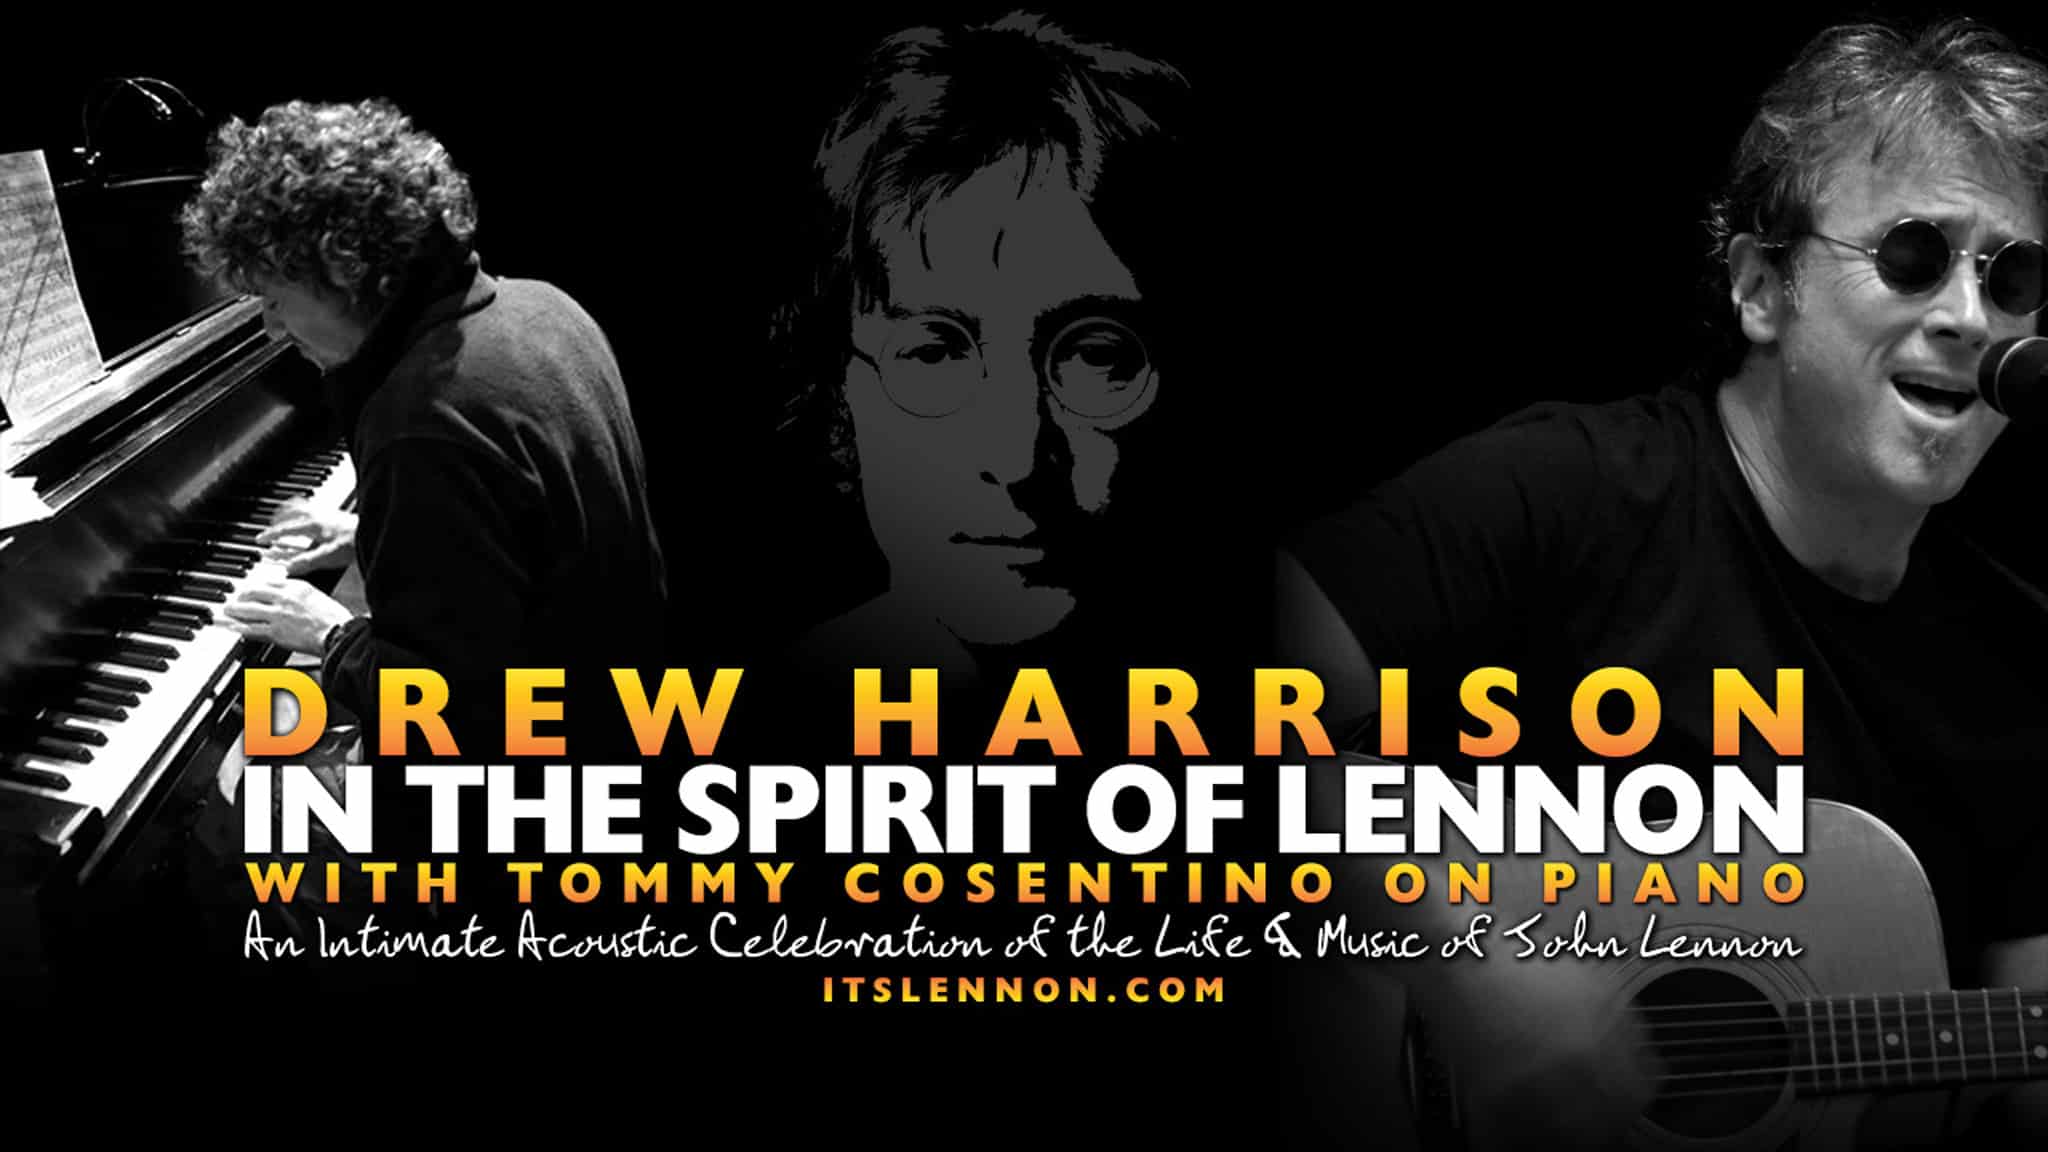 Drew Harrison in greyscale image with Tommy Cosentino. A stylized image of John Lennon is in the background.